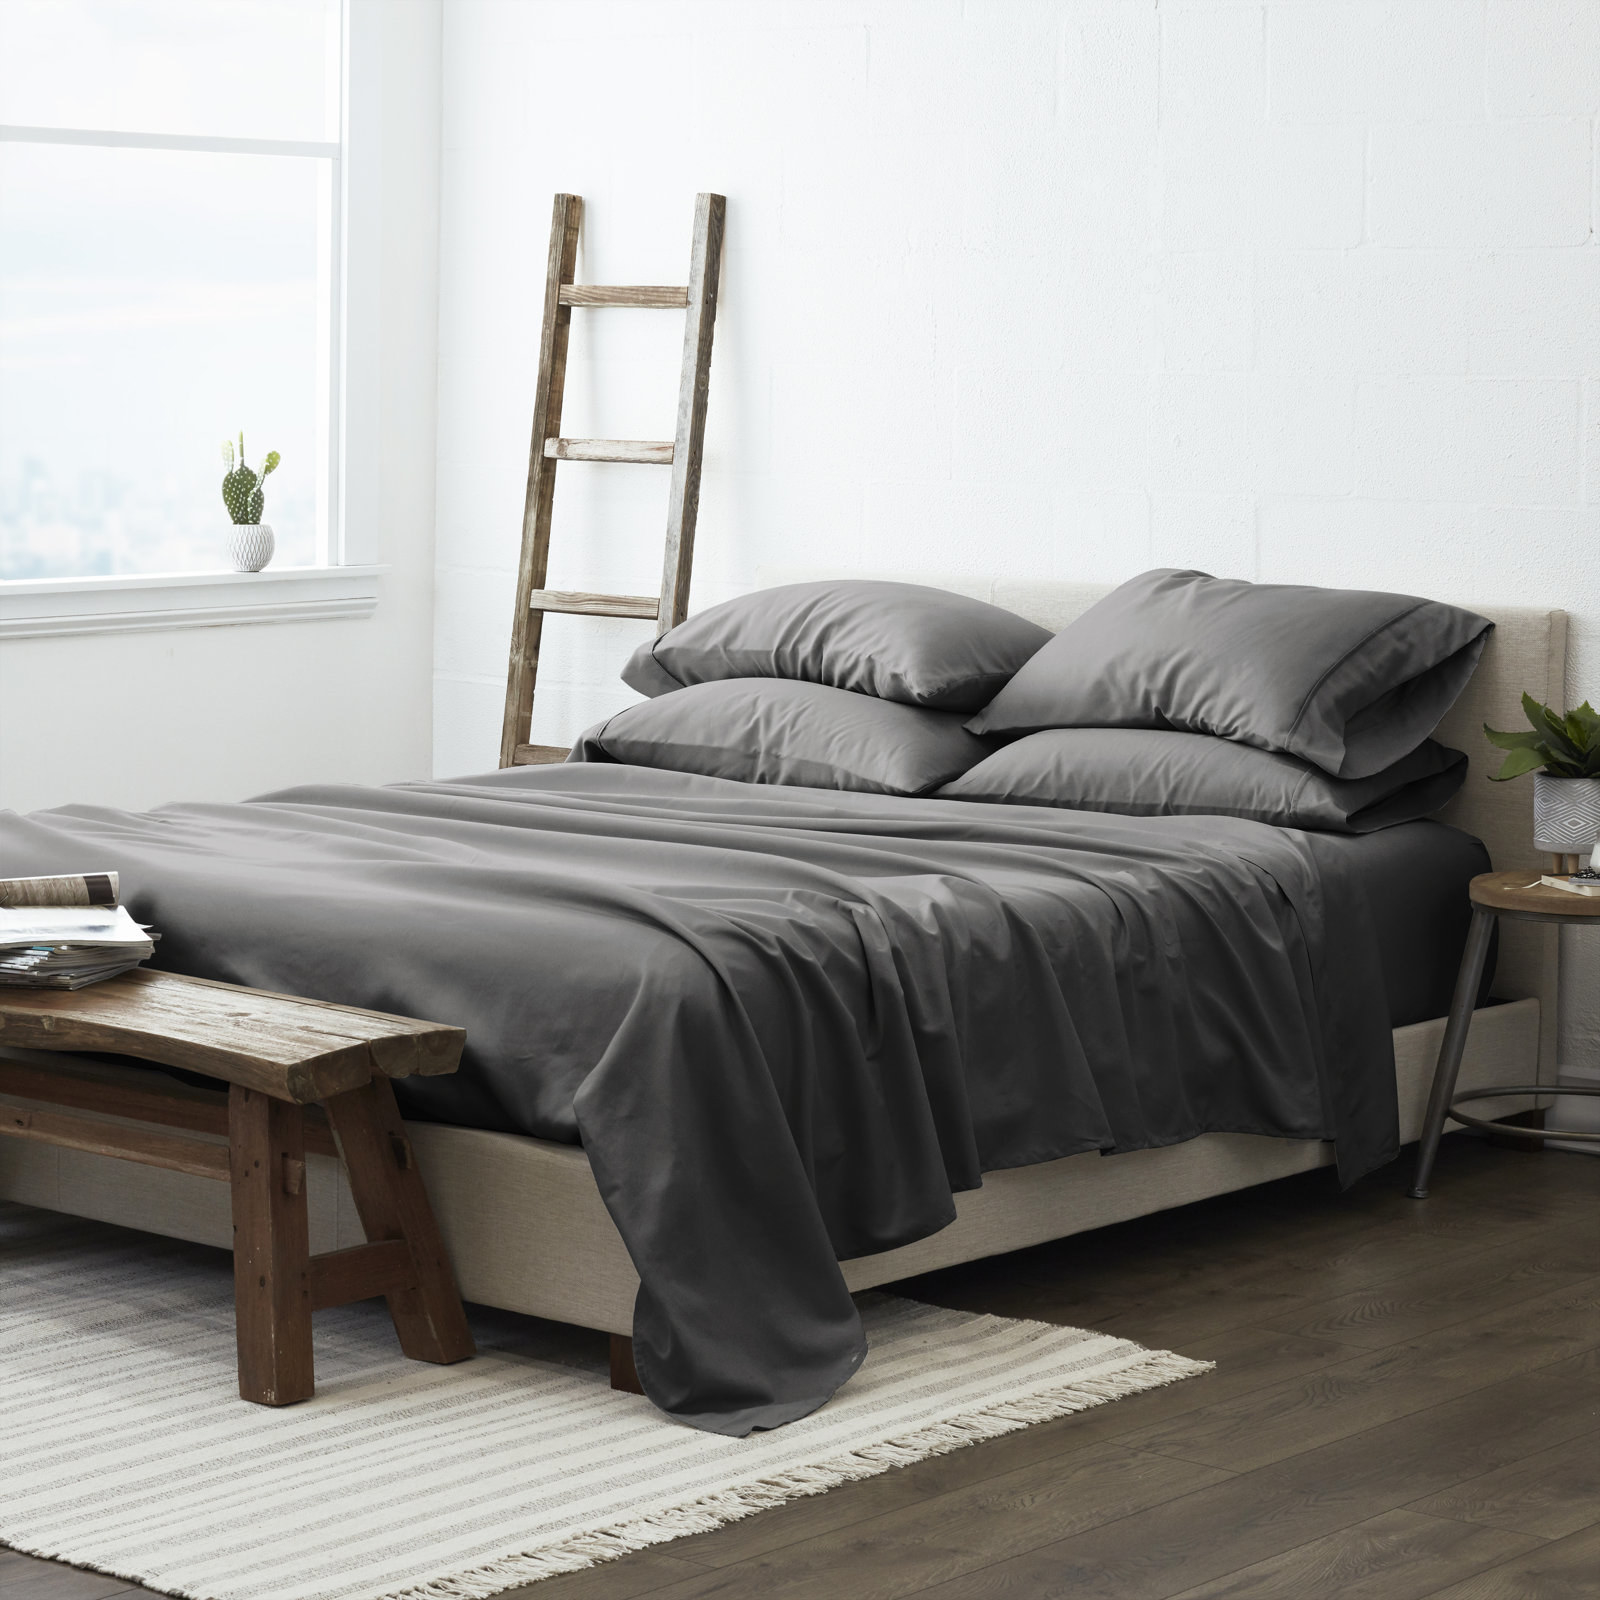 A bed with gray sheets